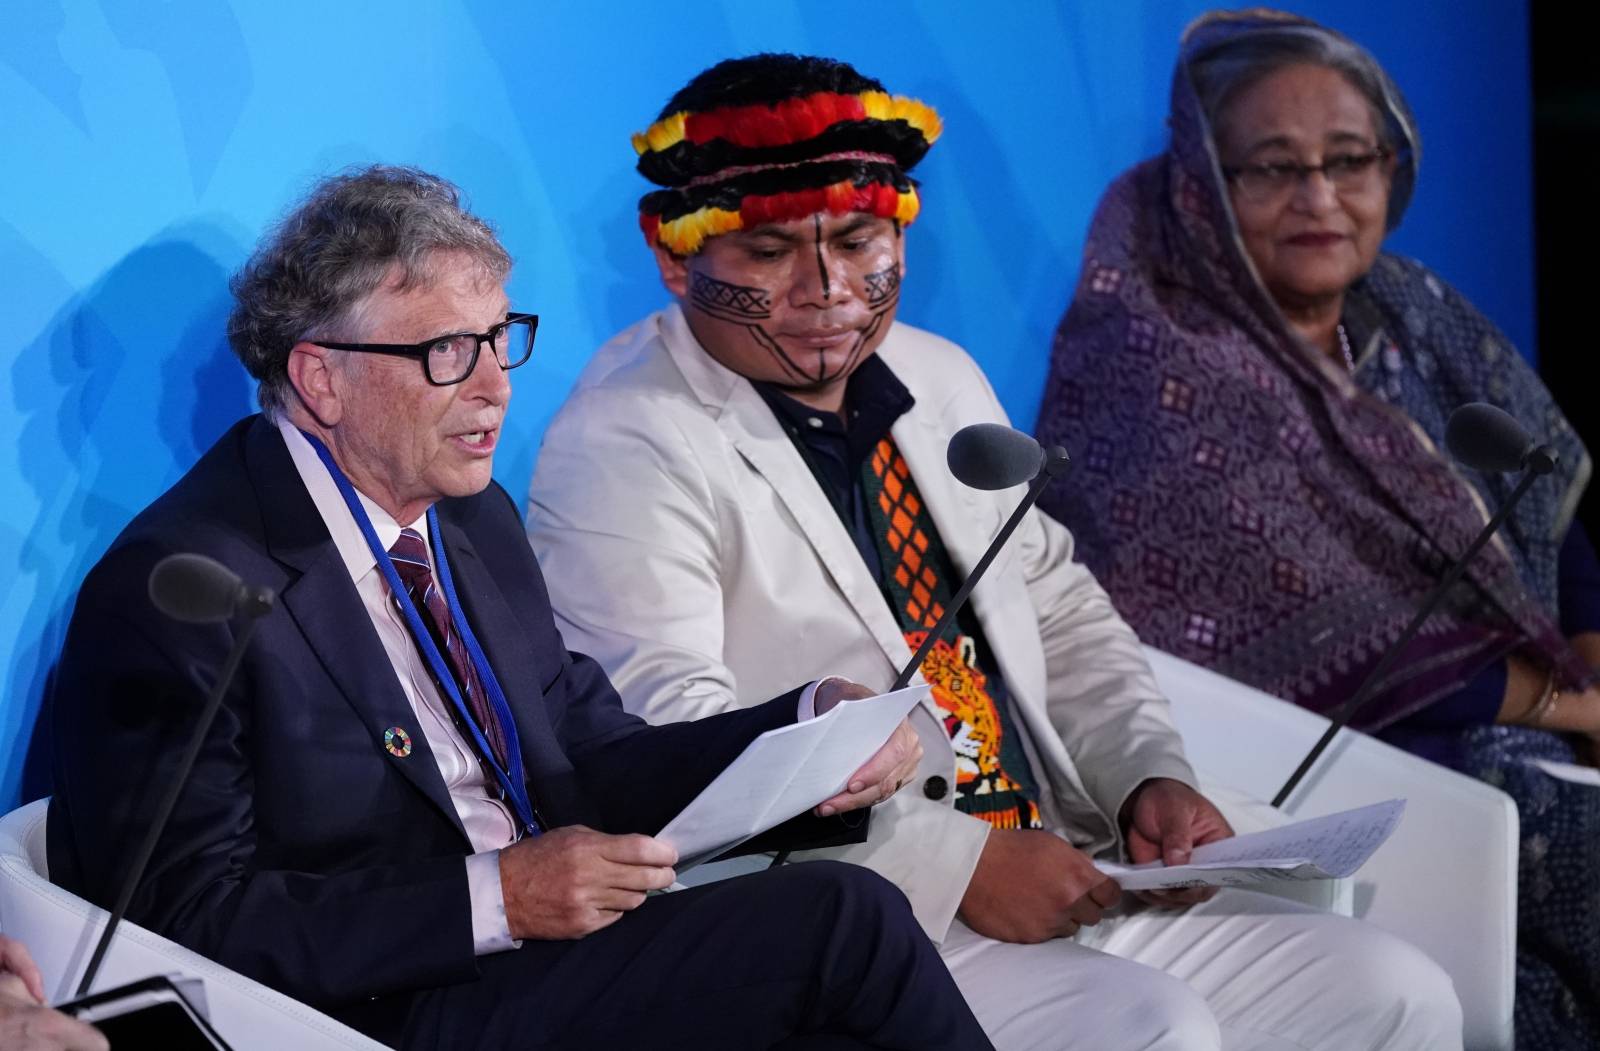 Bill Gates speaks during the 2019 United Nations Climate Action Summit at U.N. headquarters in New York City, New York, U.S.